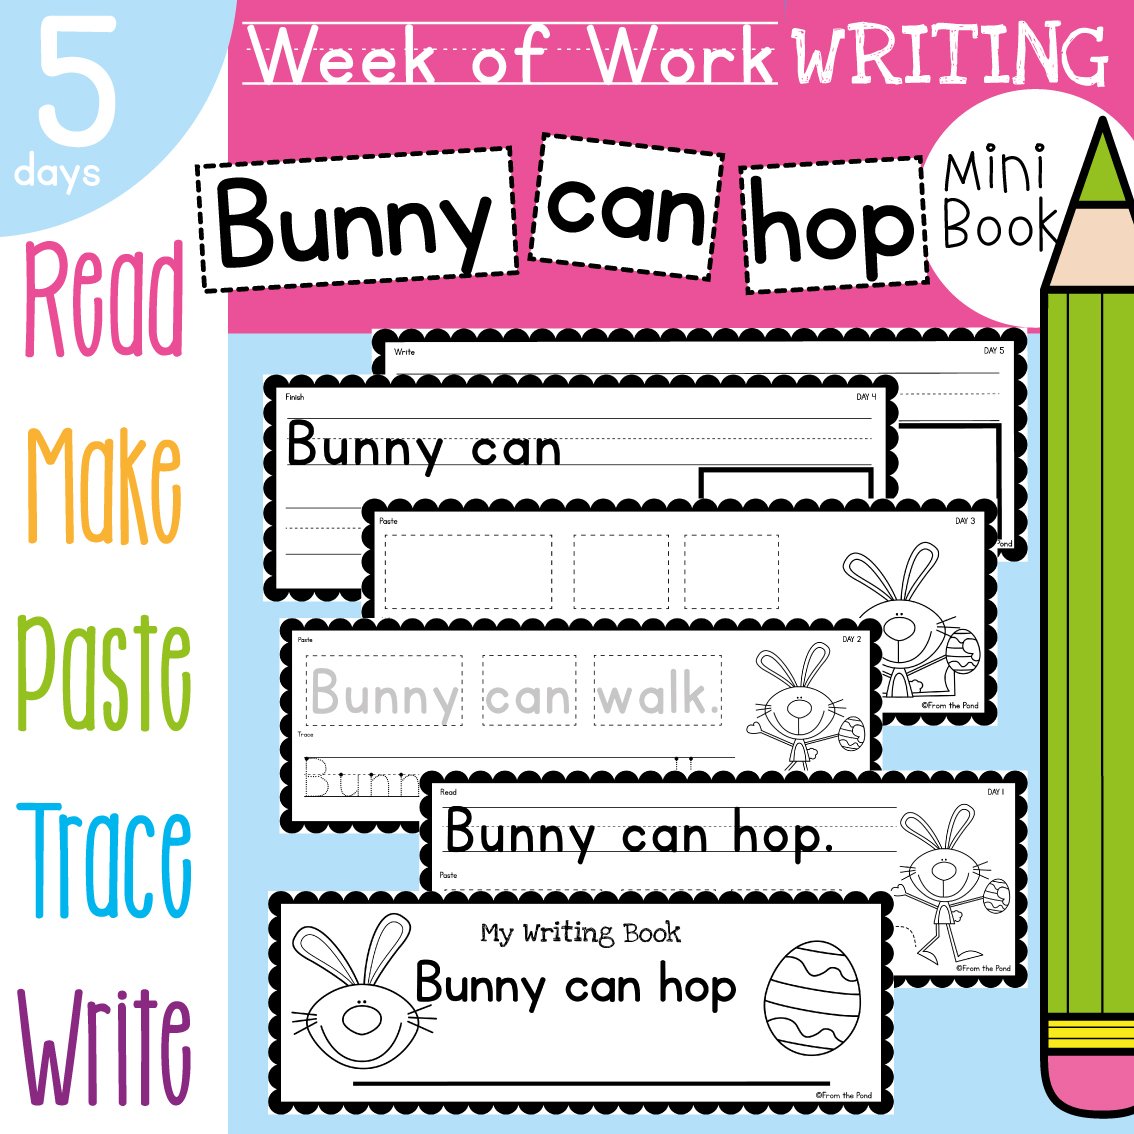 bunny-can-hop-writing-book-pic-01.jpg